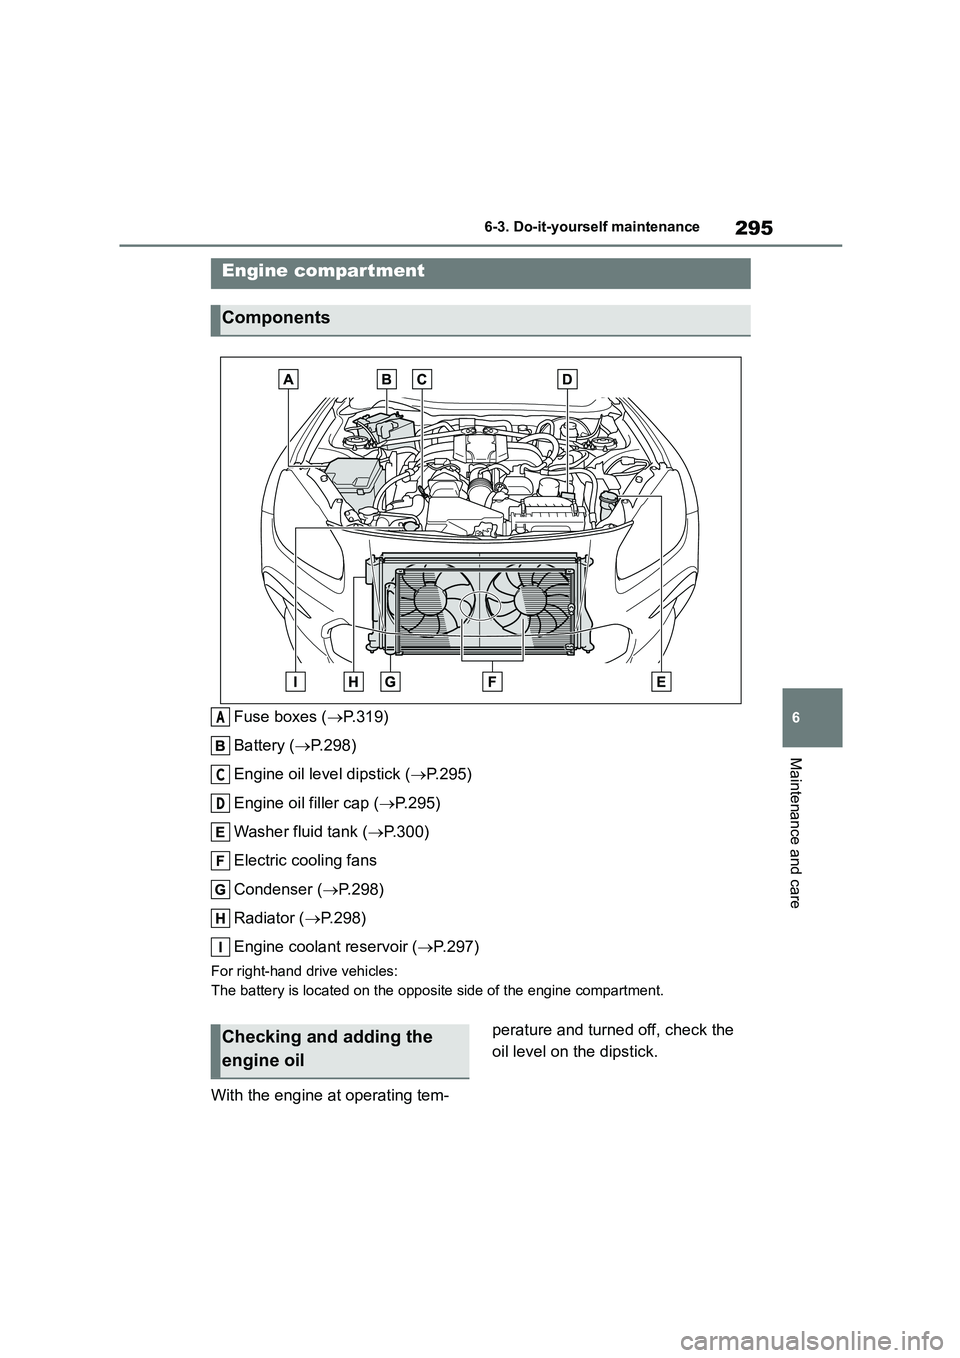 TOYOTA GR86 2022  Owners Manual (in English) 295
6 
6-3. Do-it-yourself maintenance
Maintenance and care
Fuse boxes ( P.319) 
Battery ( P.298) 
Engine oil level dipstick ( P.295) 
Engine oil filler cap ( P.295) 
Washer fluid tank ( �